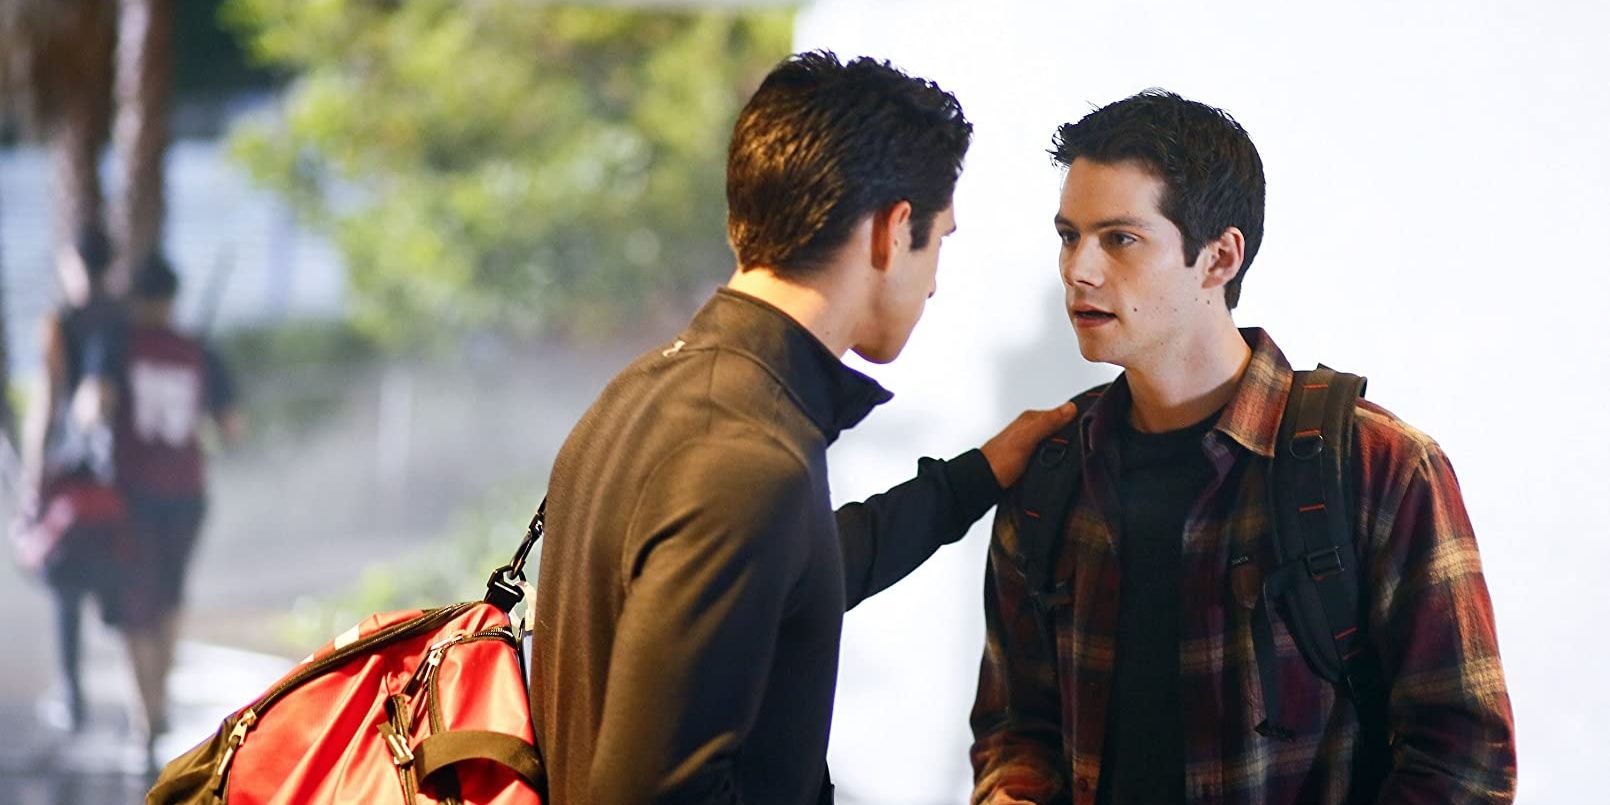 10 Questions We Need Answered In The Teen Wolf Revival Movie